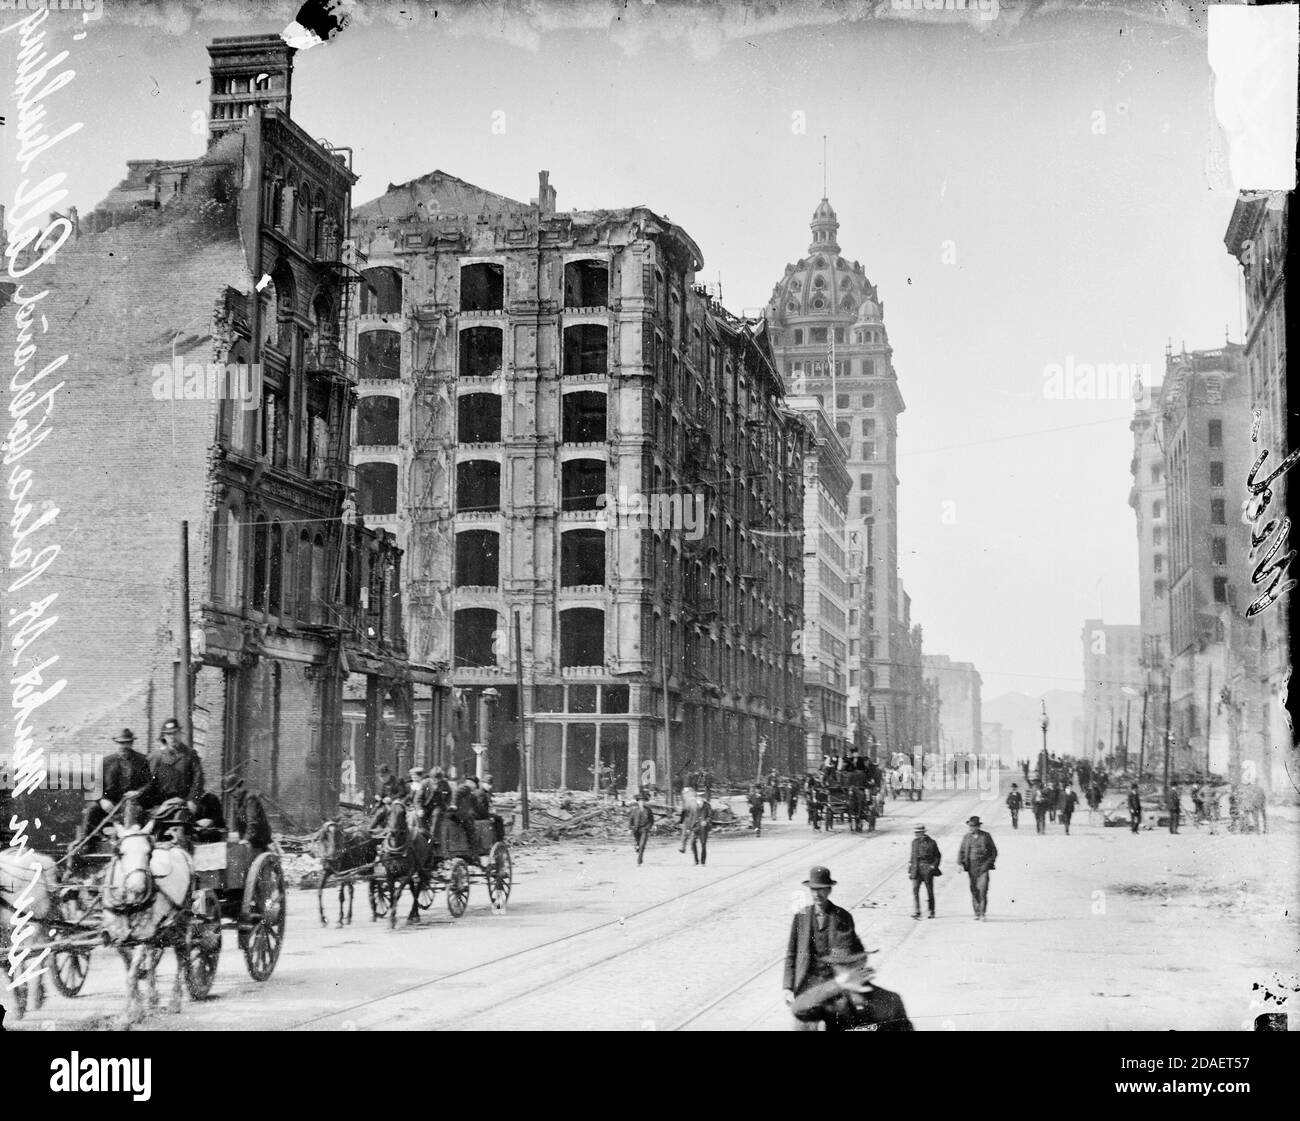 View of pedestrians and horse-drawn vehicle traffic moving along Market Street in San Francisco, California, past ruins after the 1906 earthquake. Stock Photo